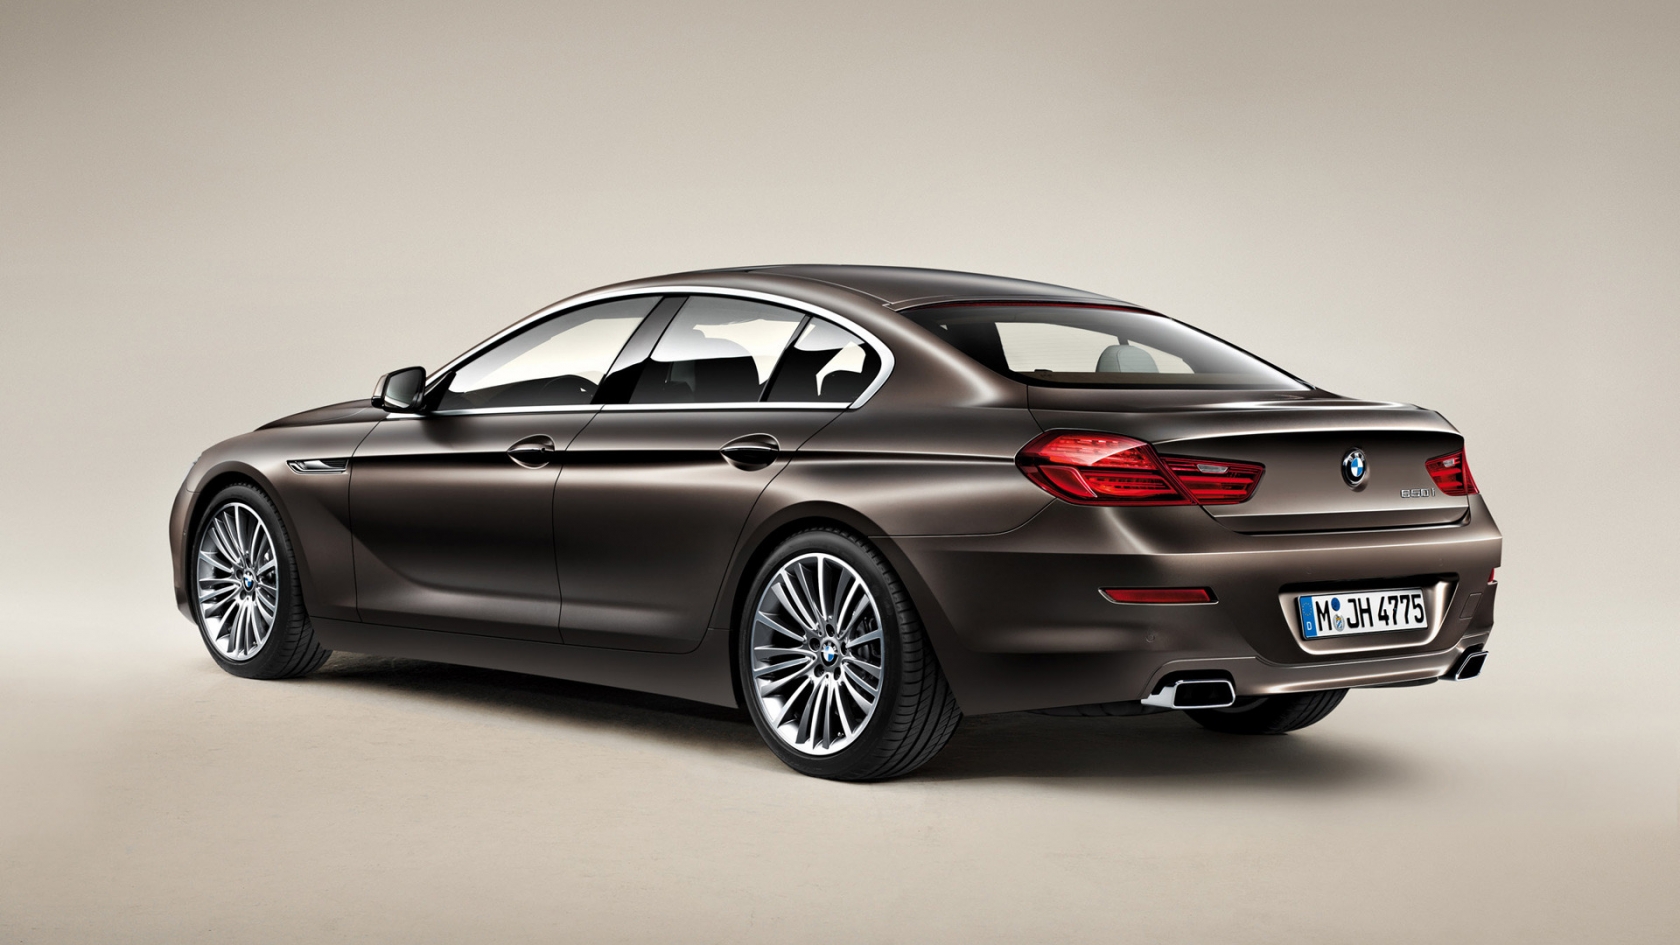 2013 BMW 6 Series Rear for 1680 x 945 HDTV resolution